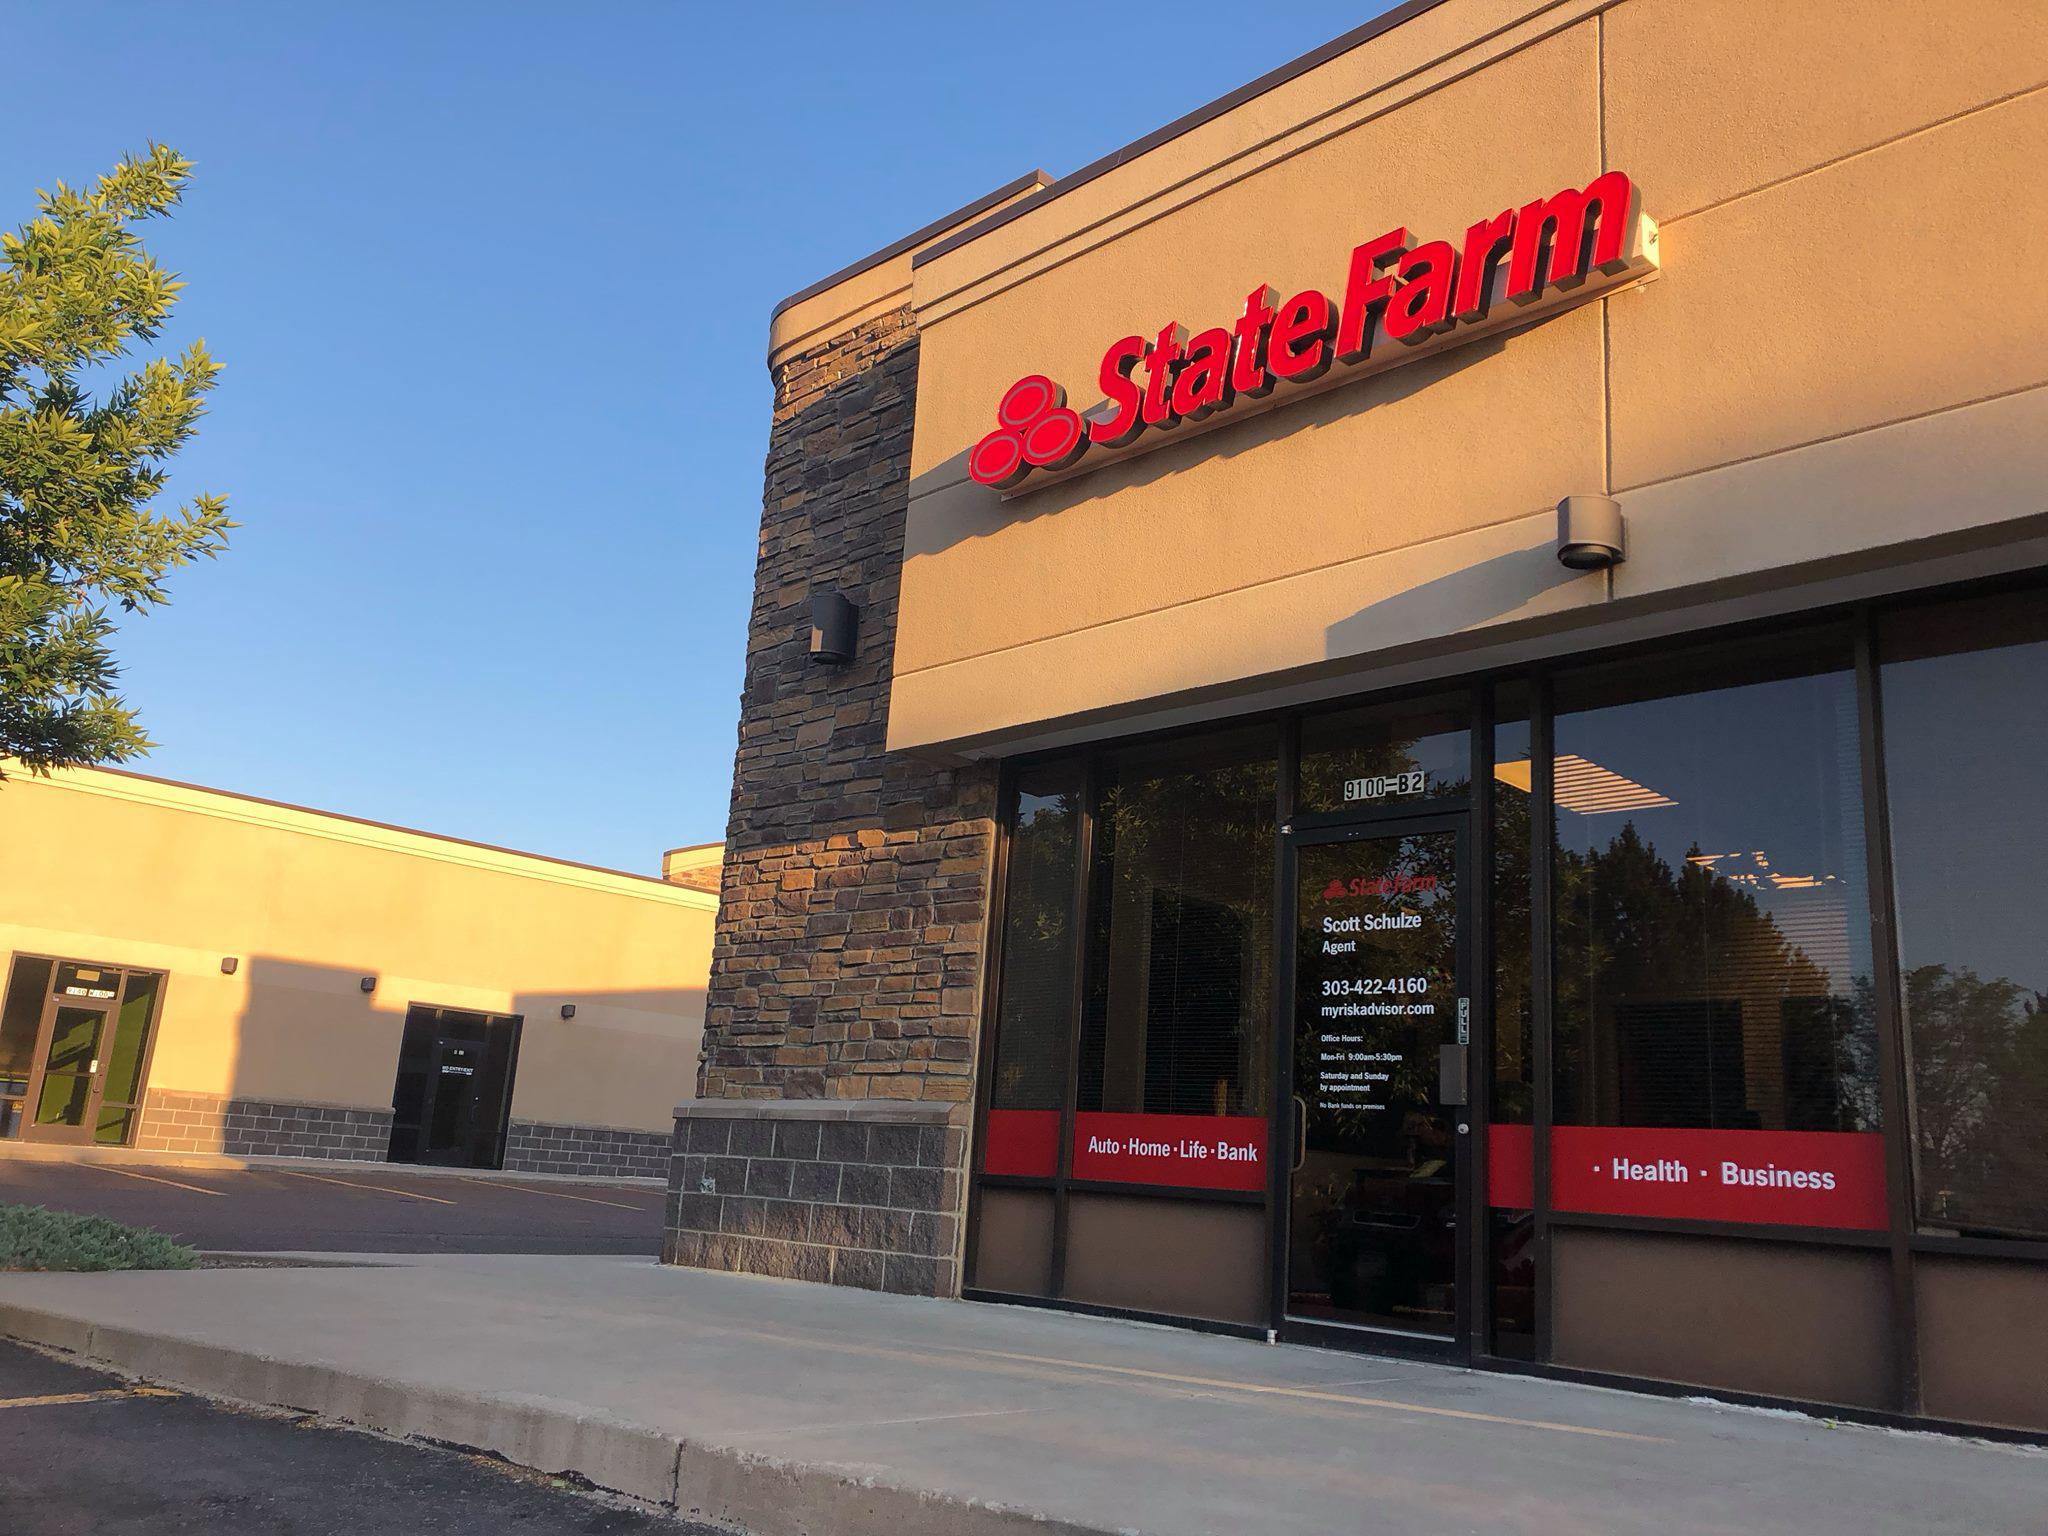 The exterior of the Scott Schulze State Farm agency